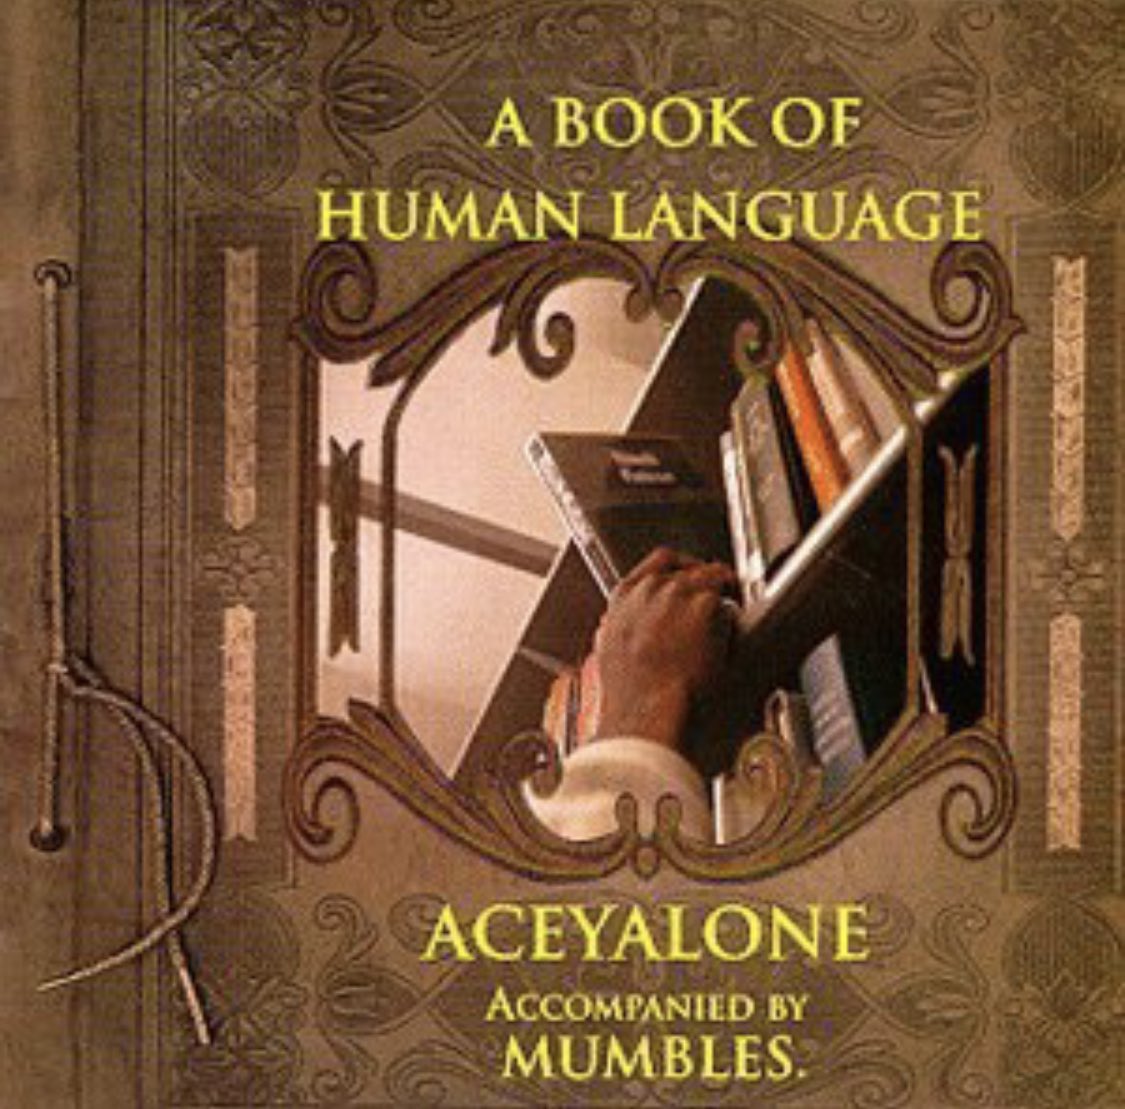 Rap History: Aceyalone (@Aceyalone) - ‘A Book of Human Language’, released April 14, 1998.